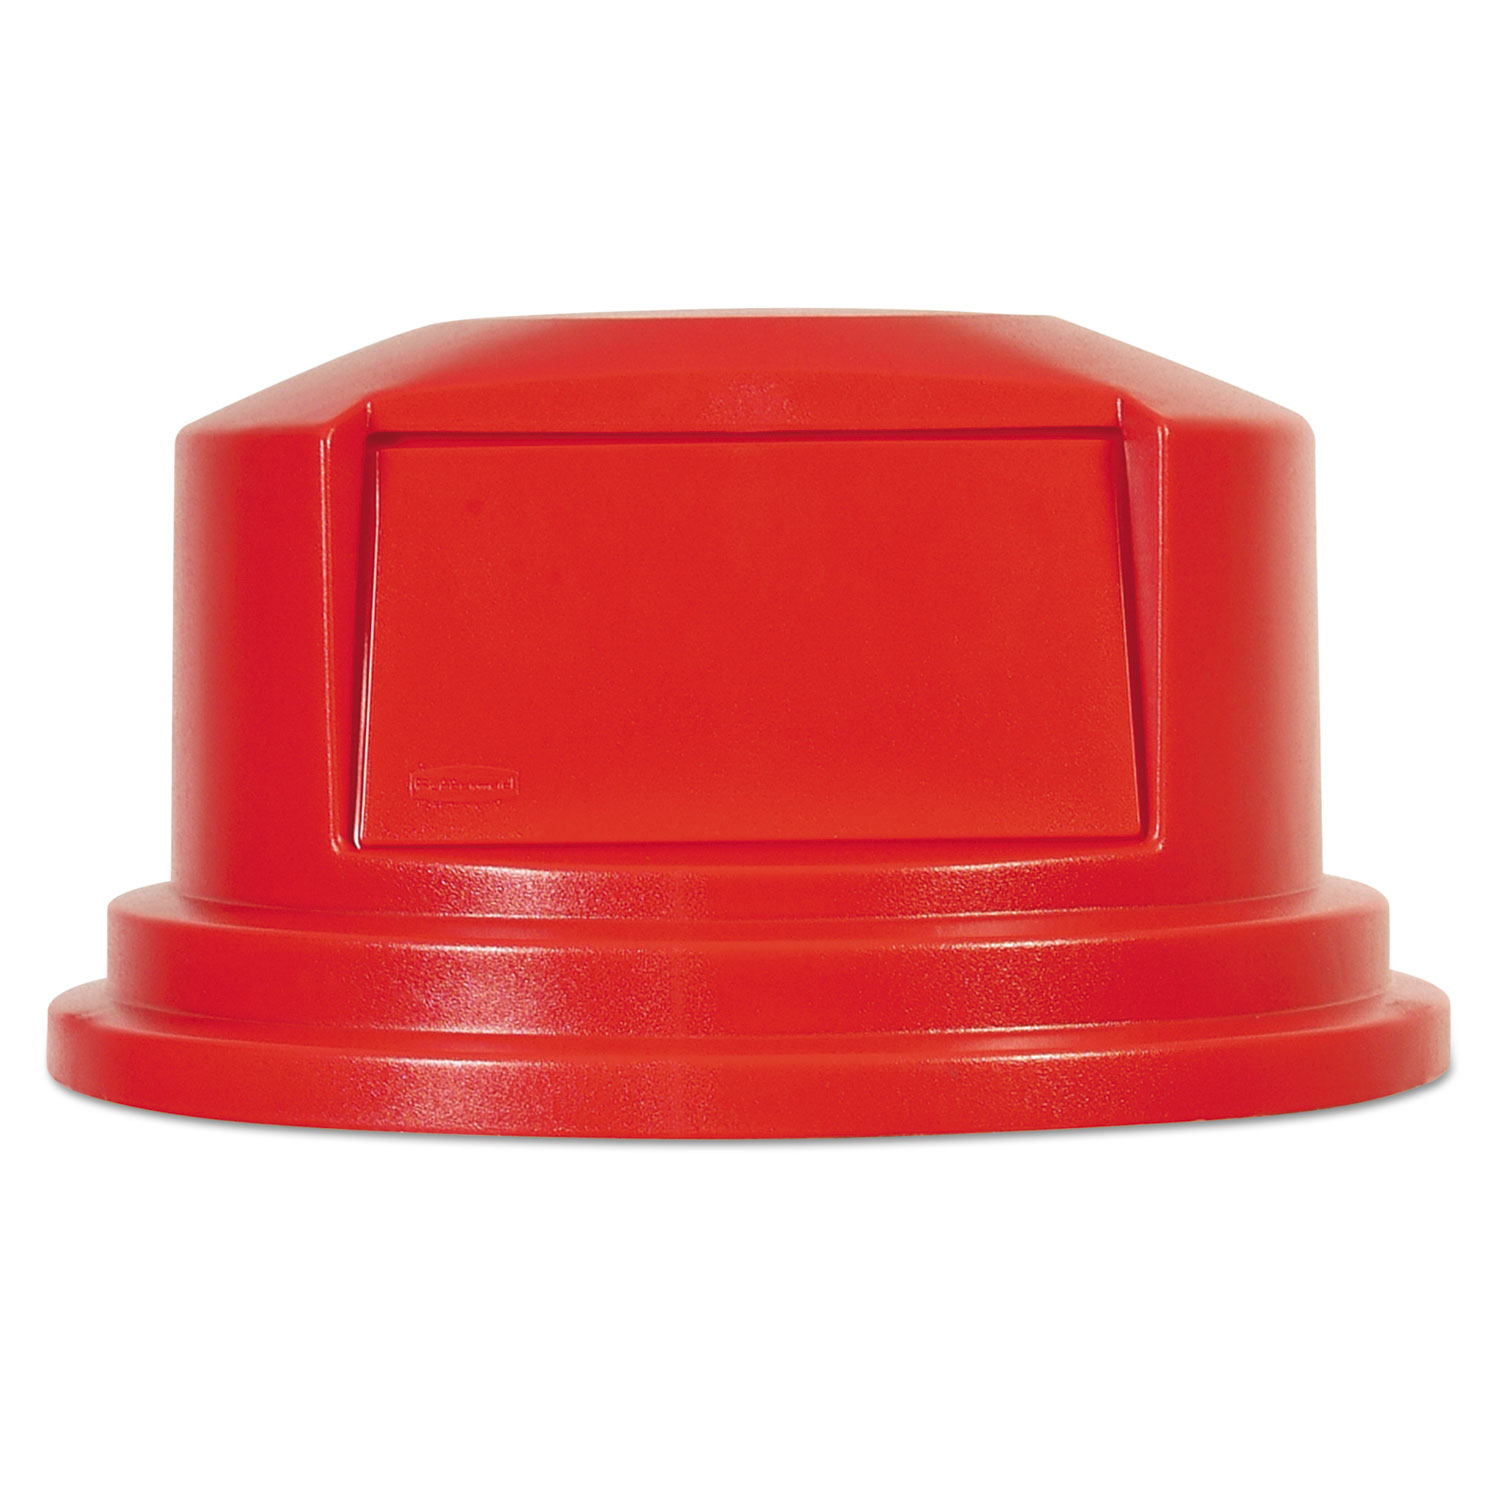 Round Brute Dome Top Lid for 55gal Waste Containers, 27 1/4 dia, Red